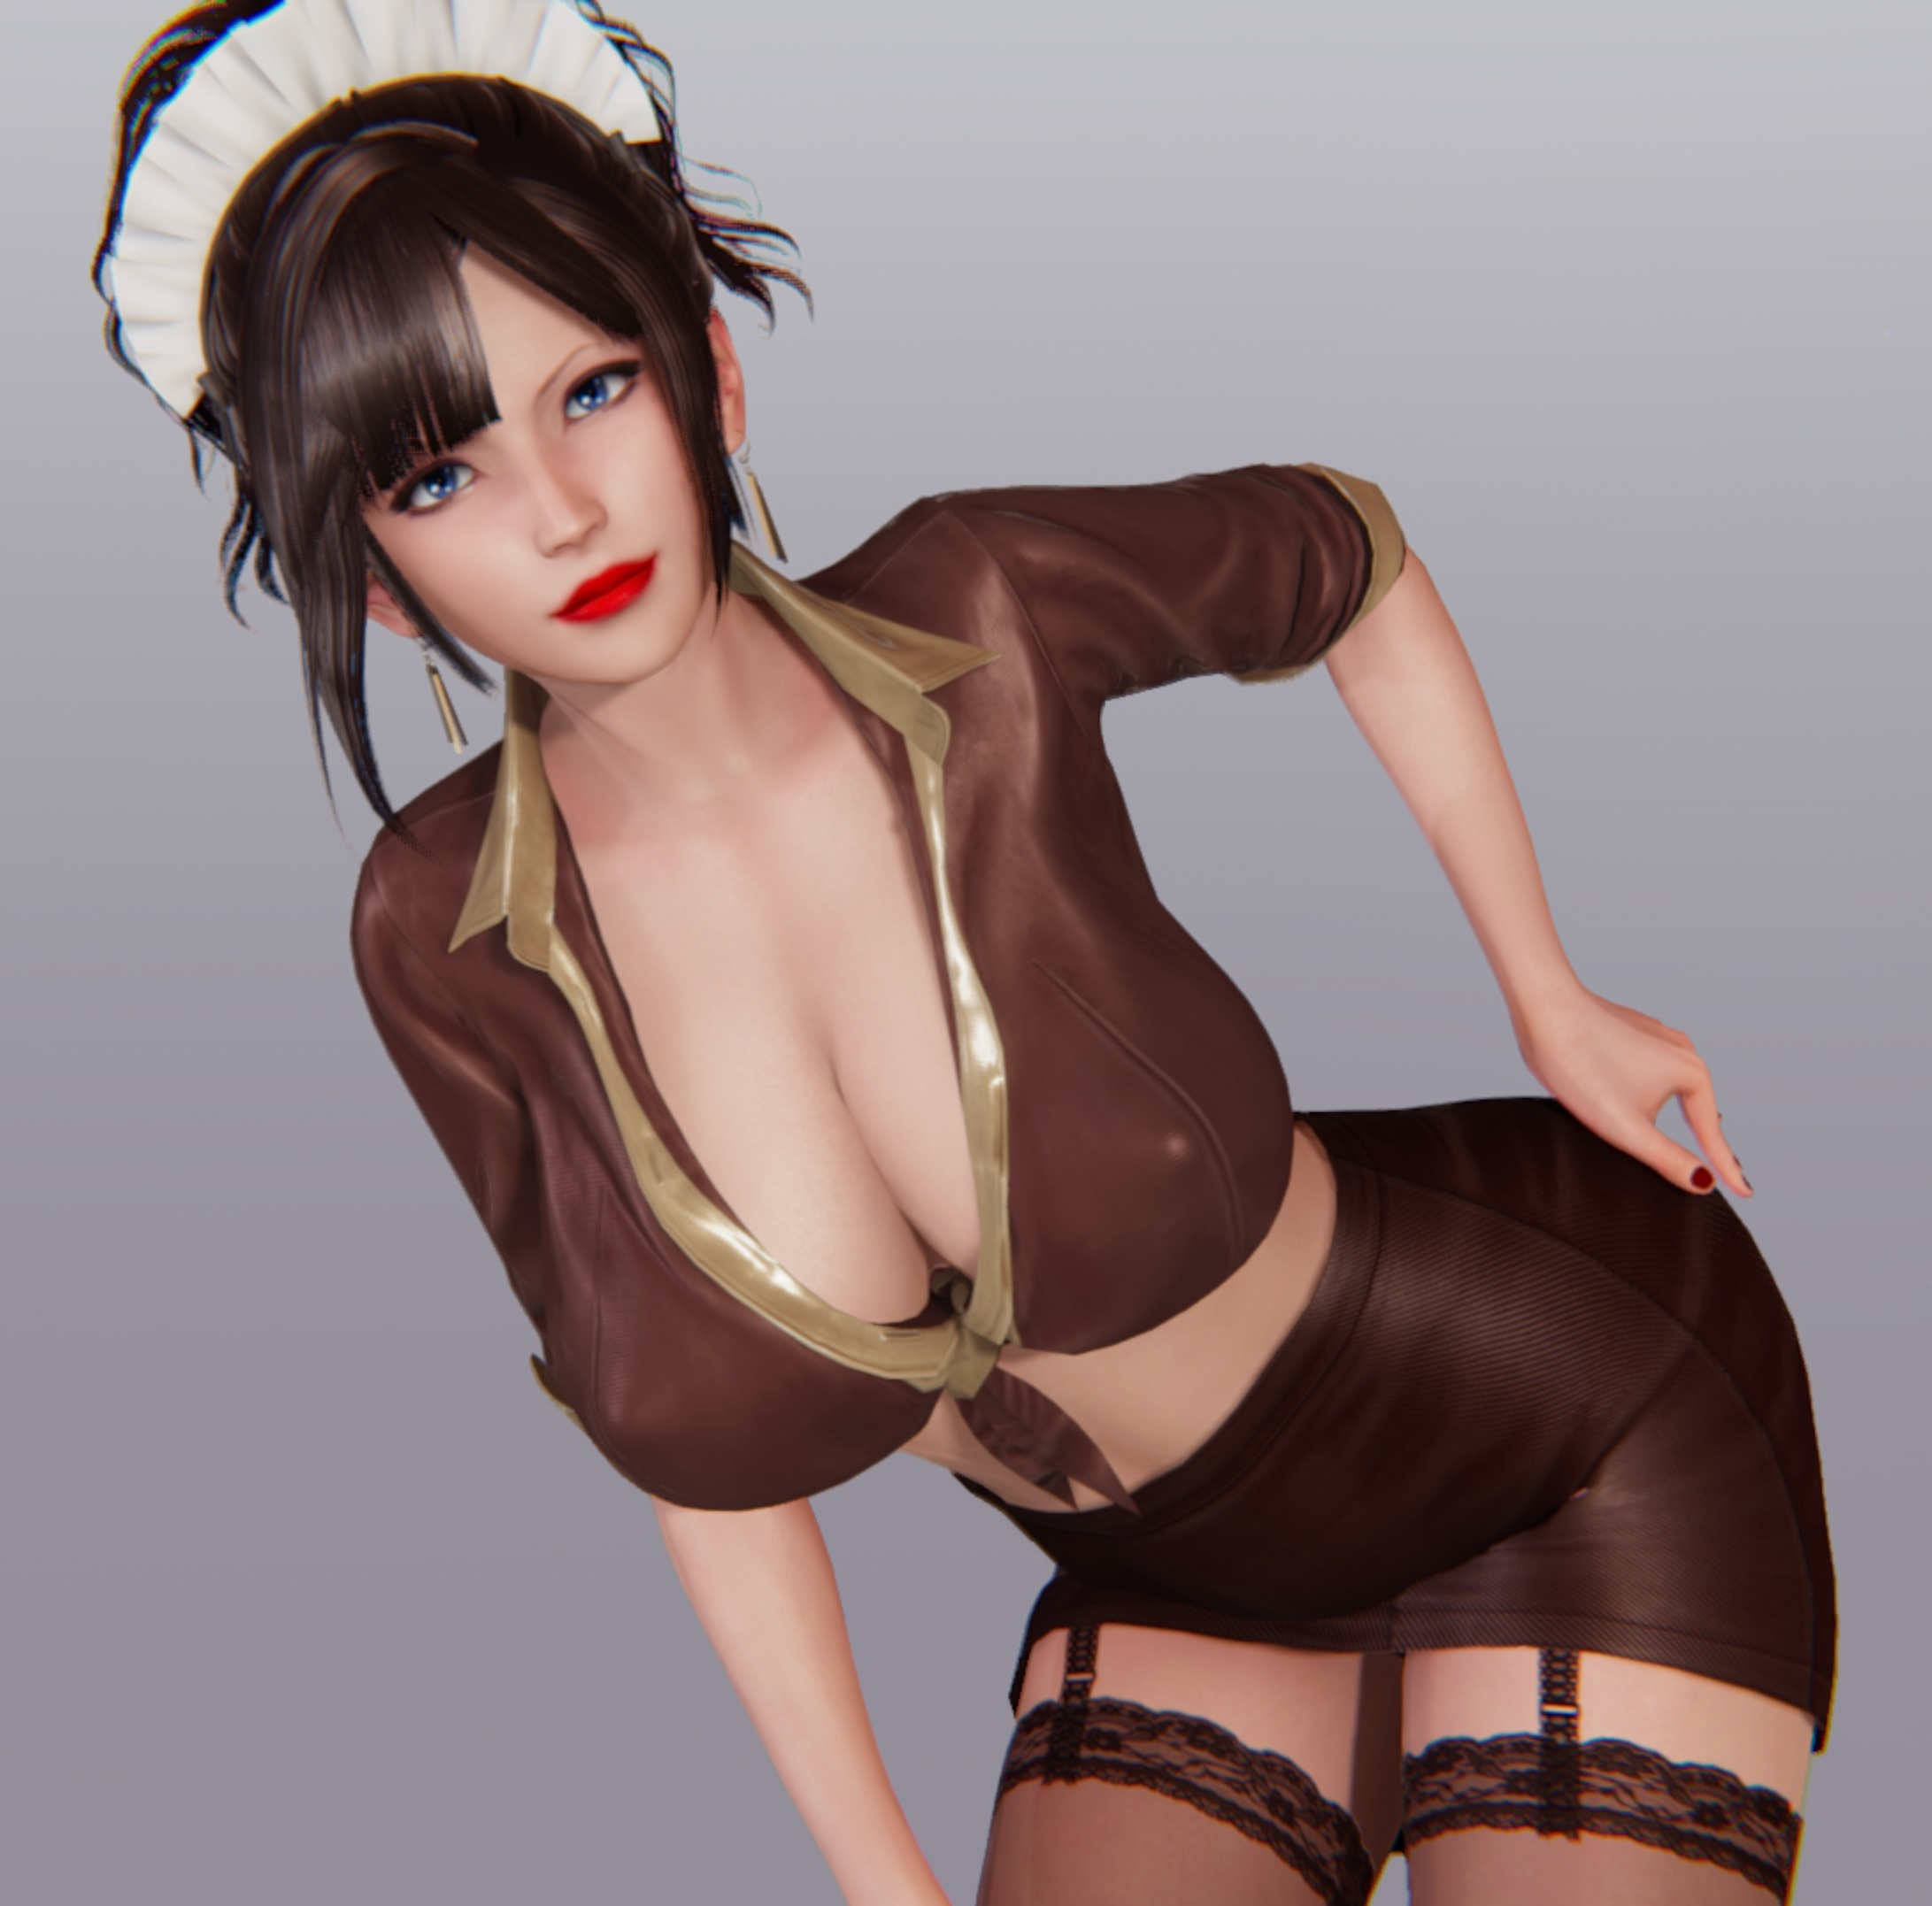 Here my first Honey Select 2 girl, hope you like it too 